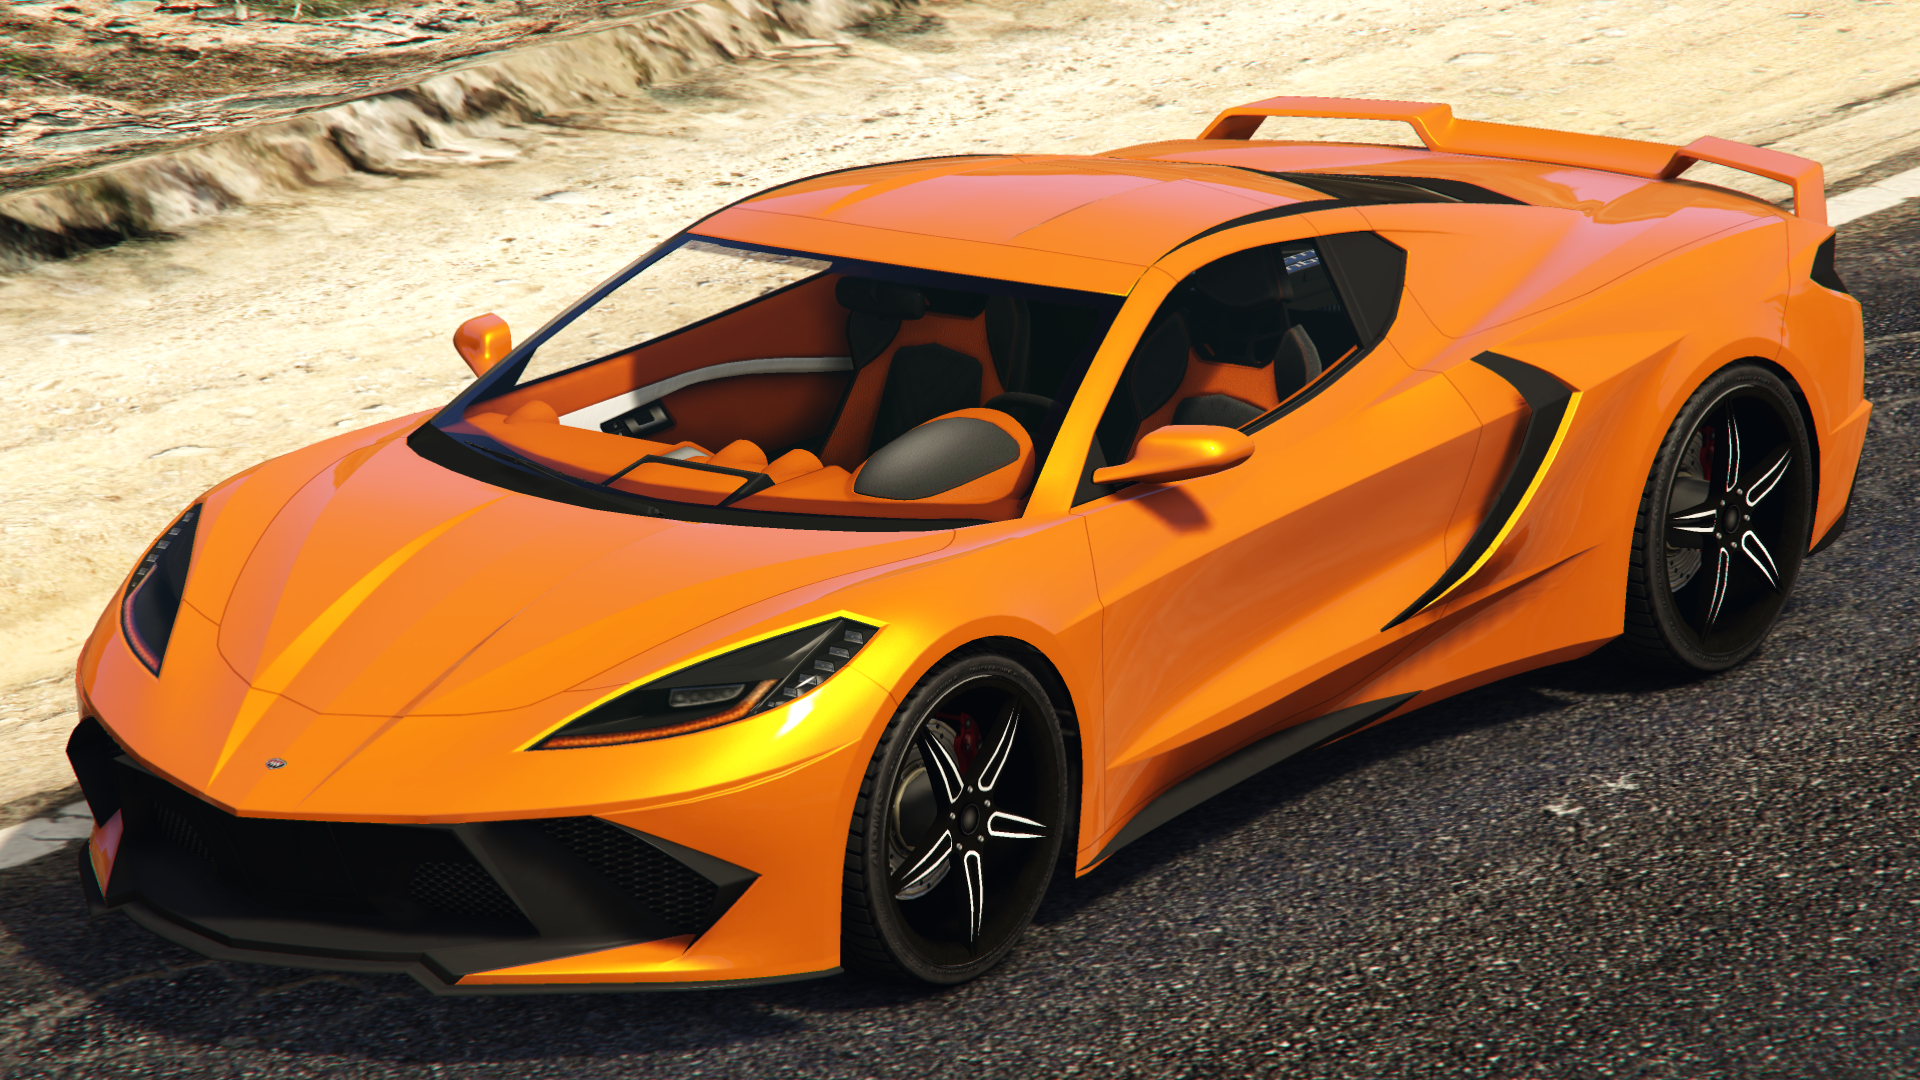 Showing off my GTA Vehicles: Part 1✨ — This is the Coquette D10